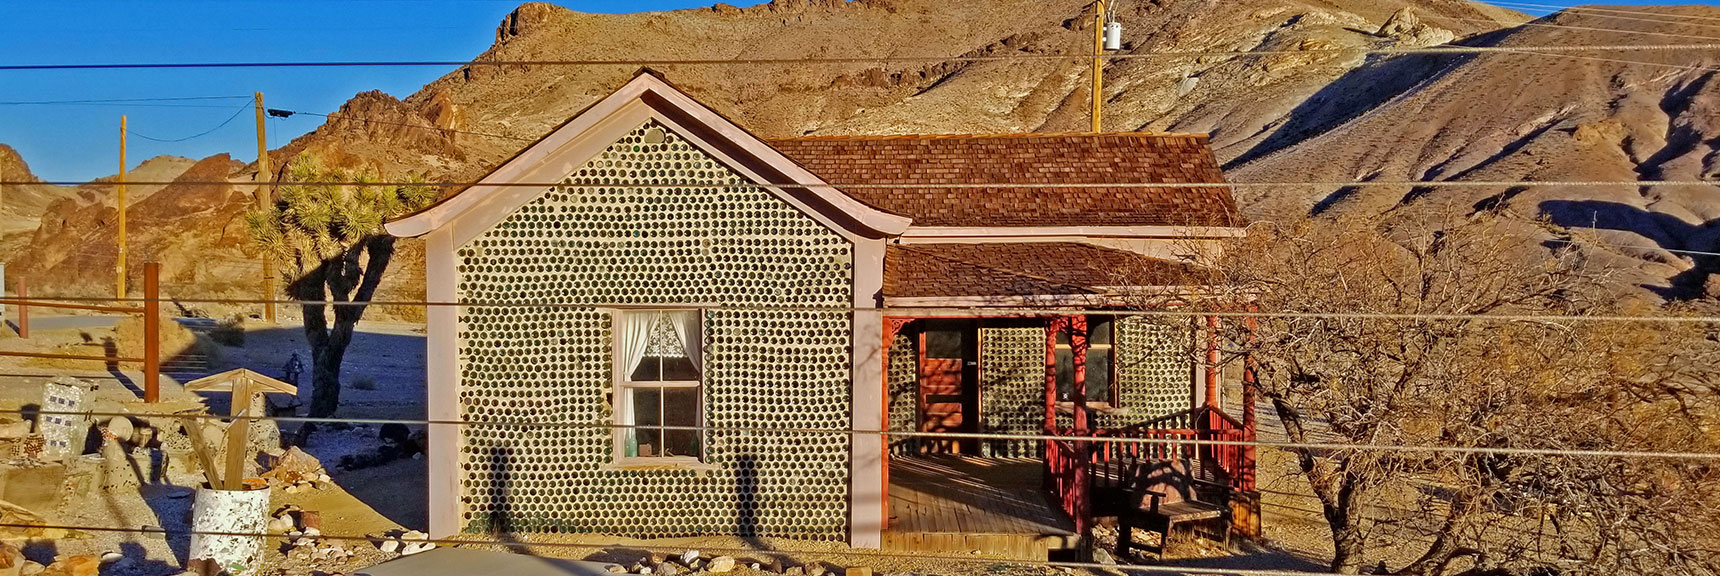 Tom Kelly Bottle House | Rhyolite Ghost Town | Death Valley Area, Nevada